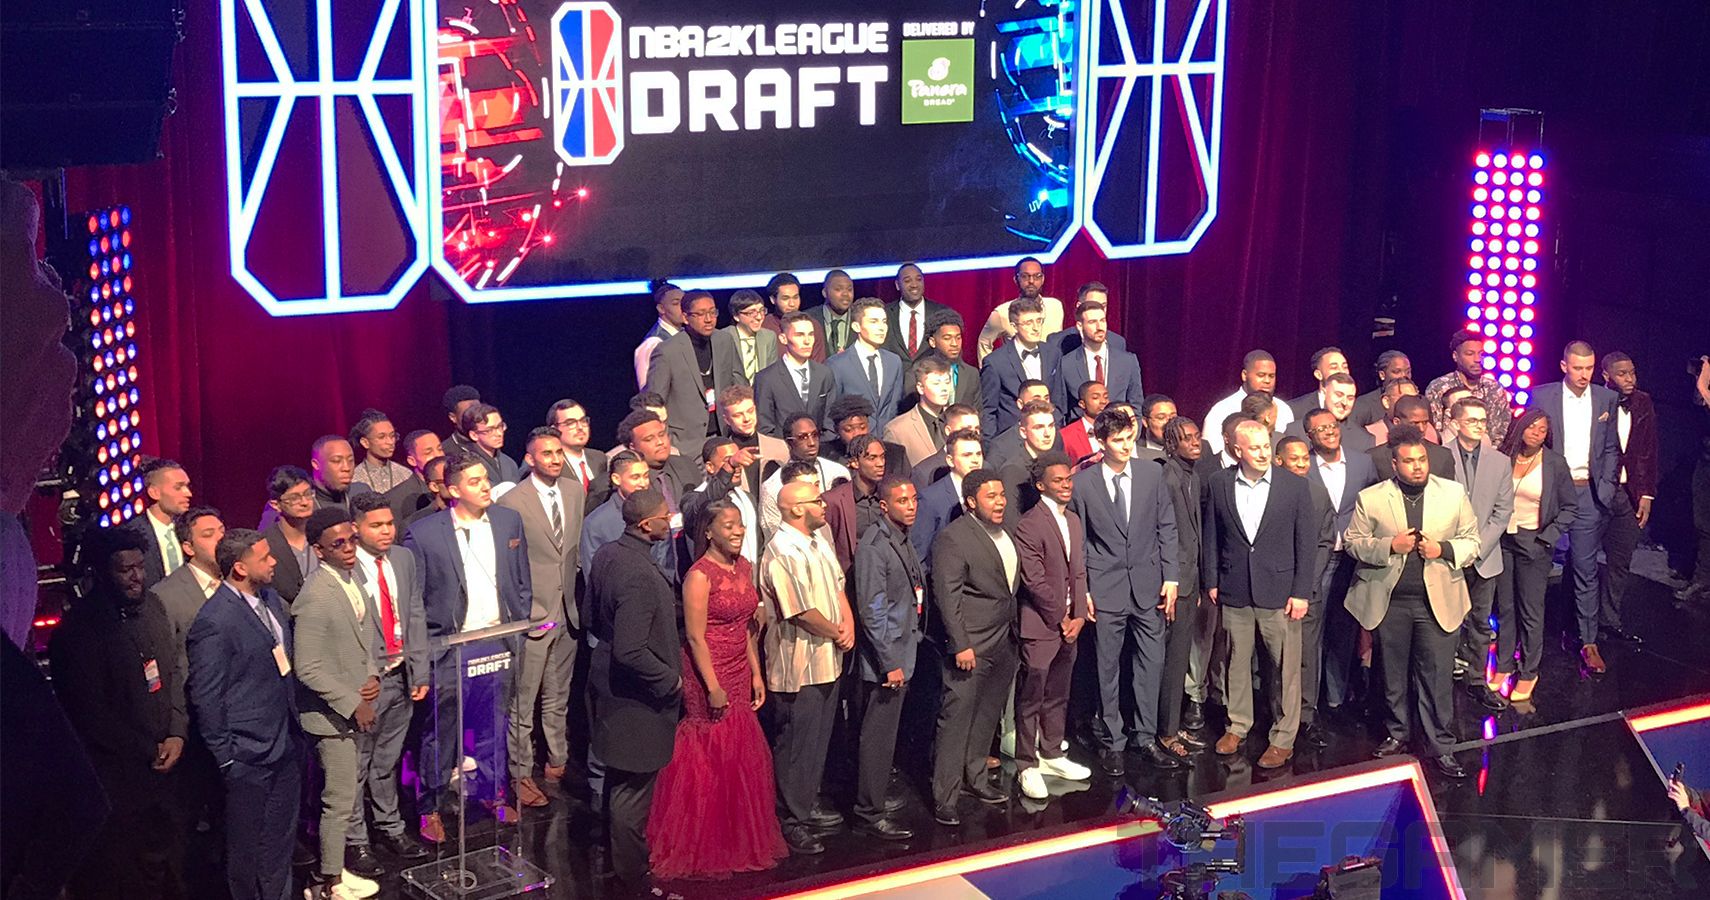 NBA 2k League Draft potential draftees stand for a group image at Terminal 5 in NYC.